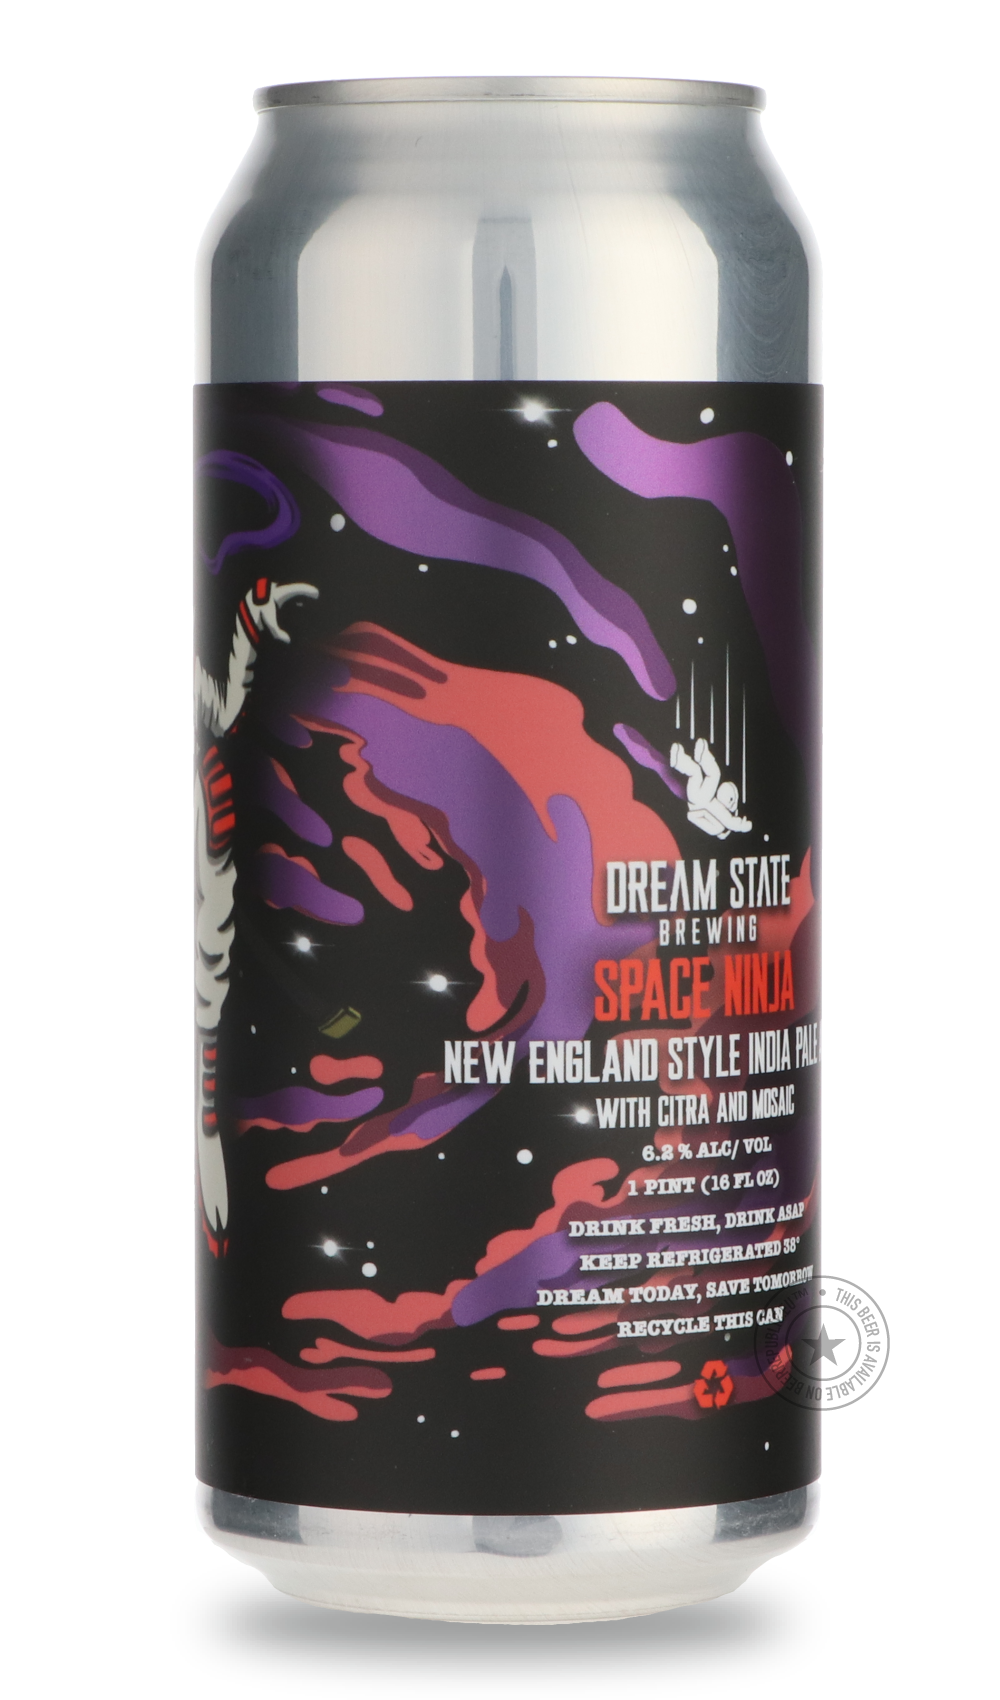 -Dream State- Space Ninja-IPA- Only @ Beer Republic - The best online beer store for American & Canadian craft beer - Buy beer online from the USA and Canada - Bier online kopen - Amerikaans bier kopen - Craft beer store - Craft beer kopen - Amerikanisch bier kaufen - Bier online kaufen - Acheter biere online - IPA - Stout - Porter - New England IPA - Hazy IPA - Imperial Stout - Barrel Aged - Barrel Aged Imperial Stout - Brown - Dark beer - Blond - Blonde - Pilsner - Lager - Wheat - Weizen - Amber - Barley 